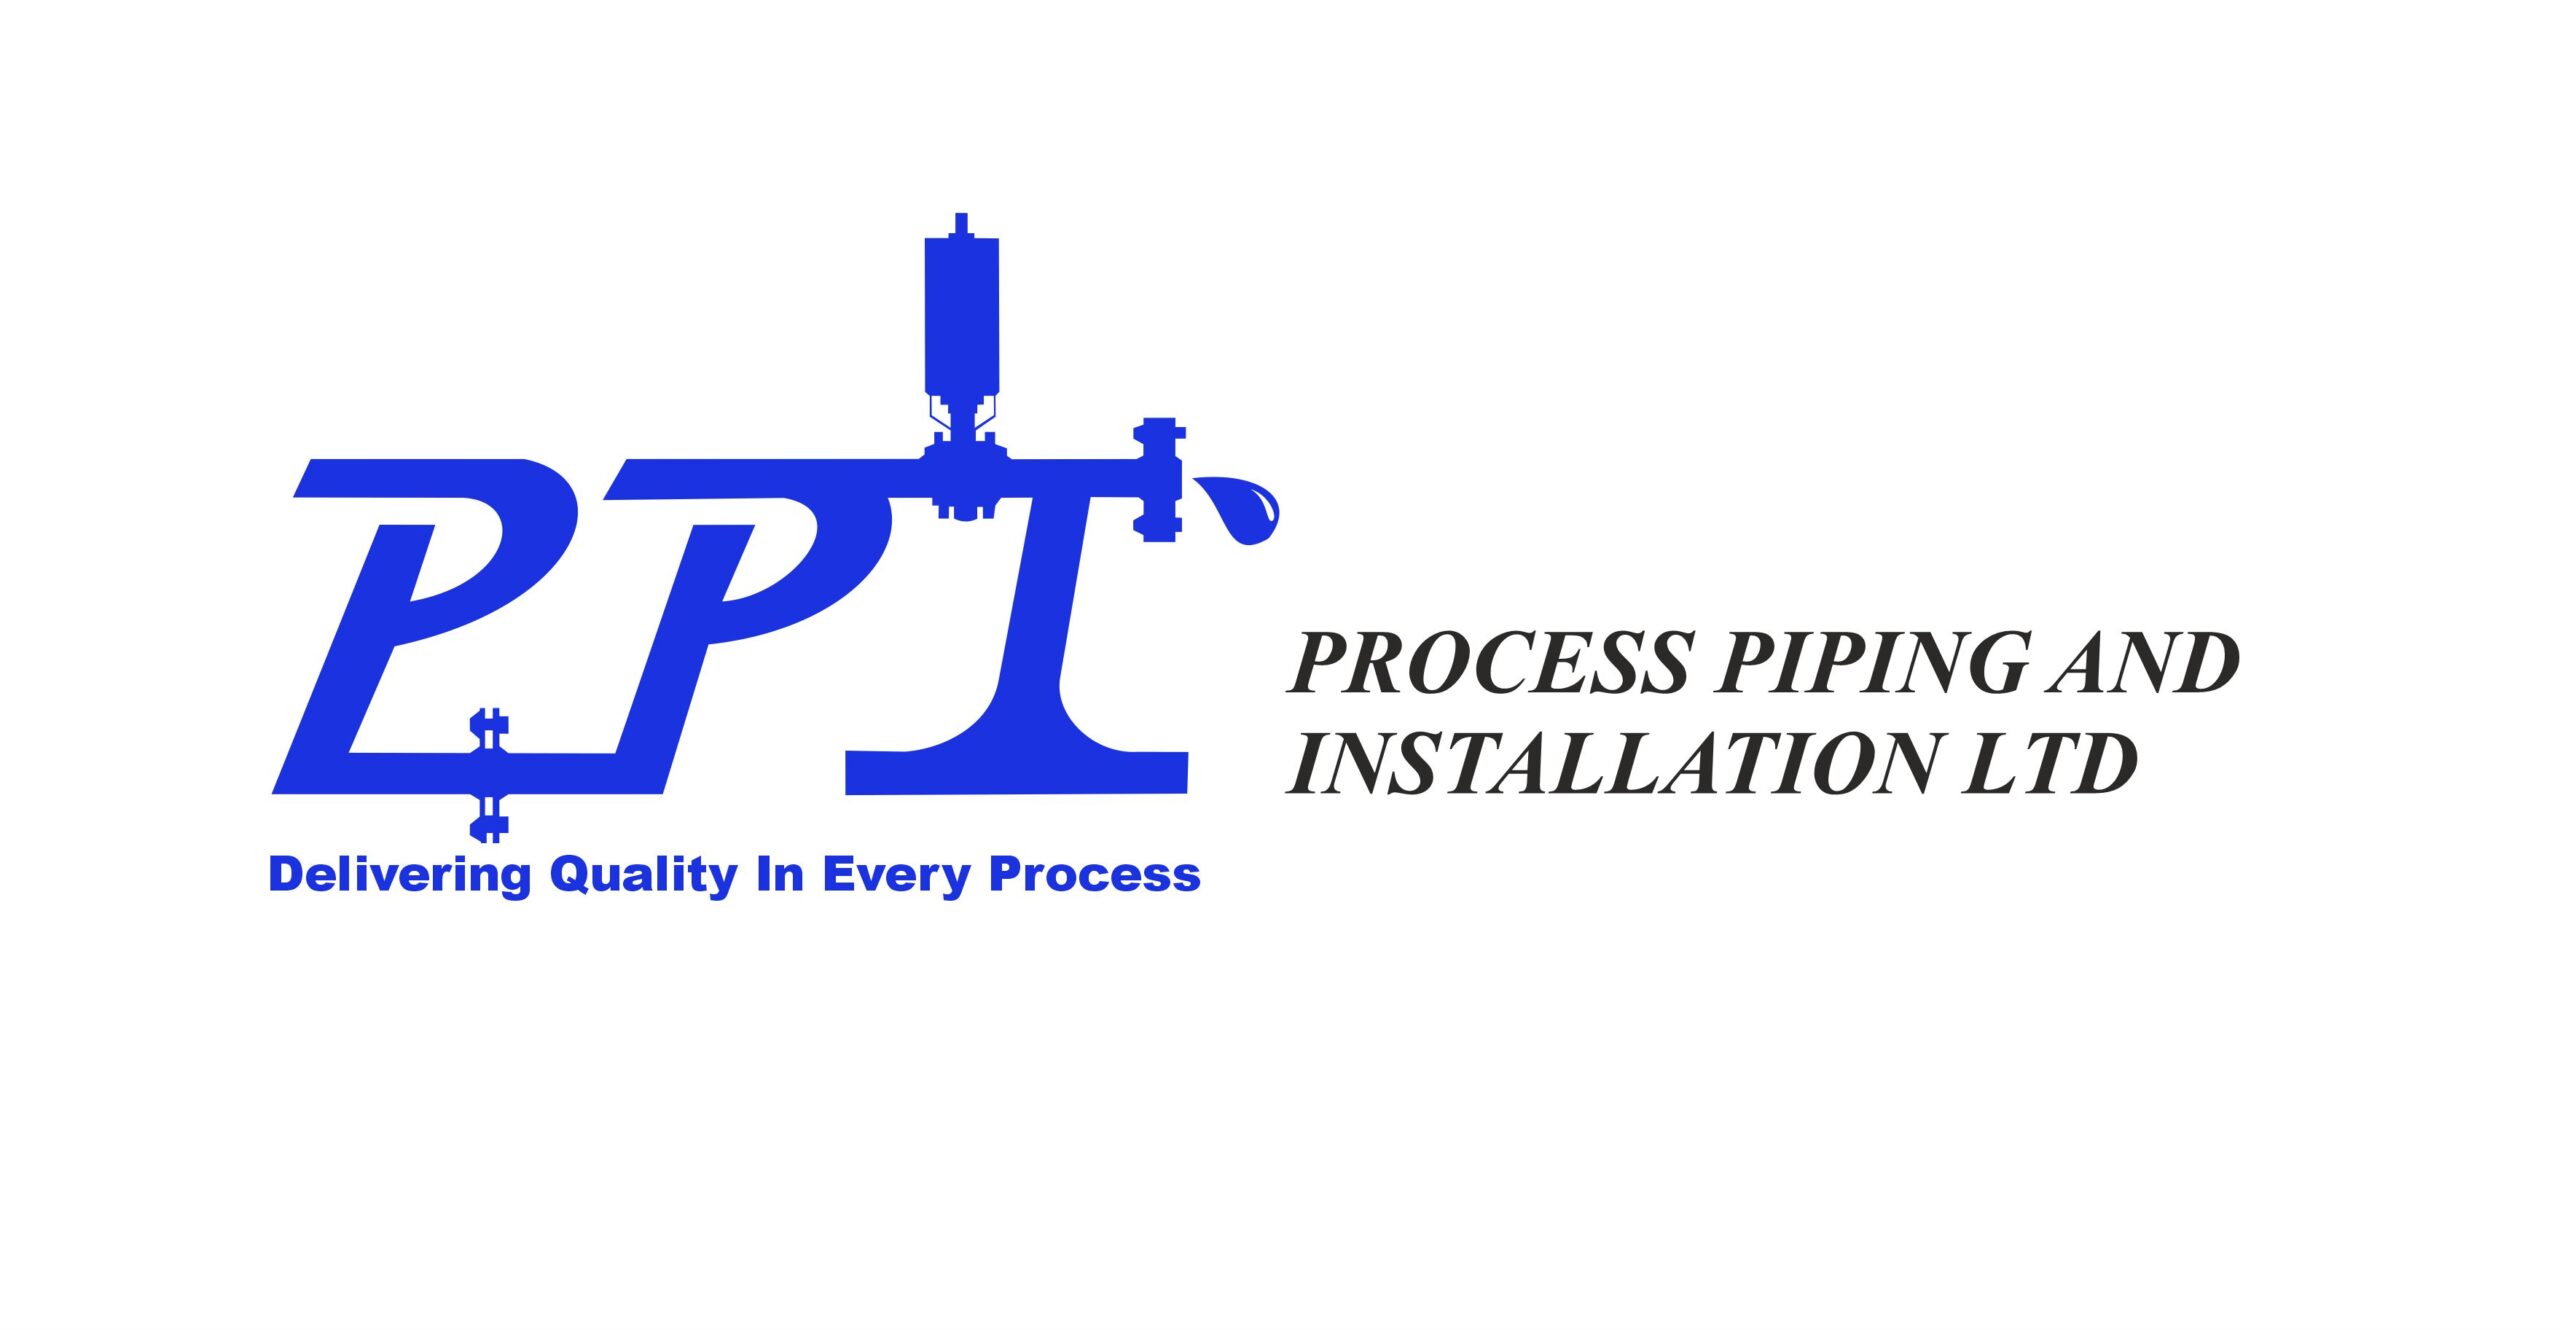 PROCESS PIPING AND INSTALLATION LIMITED